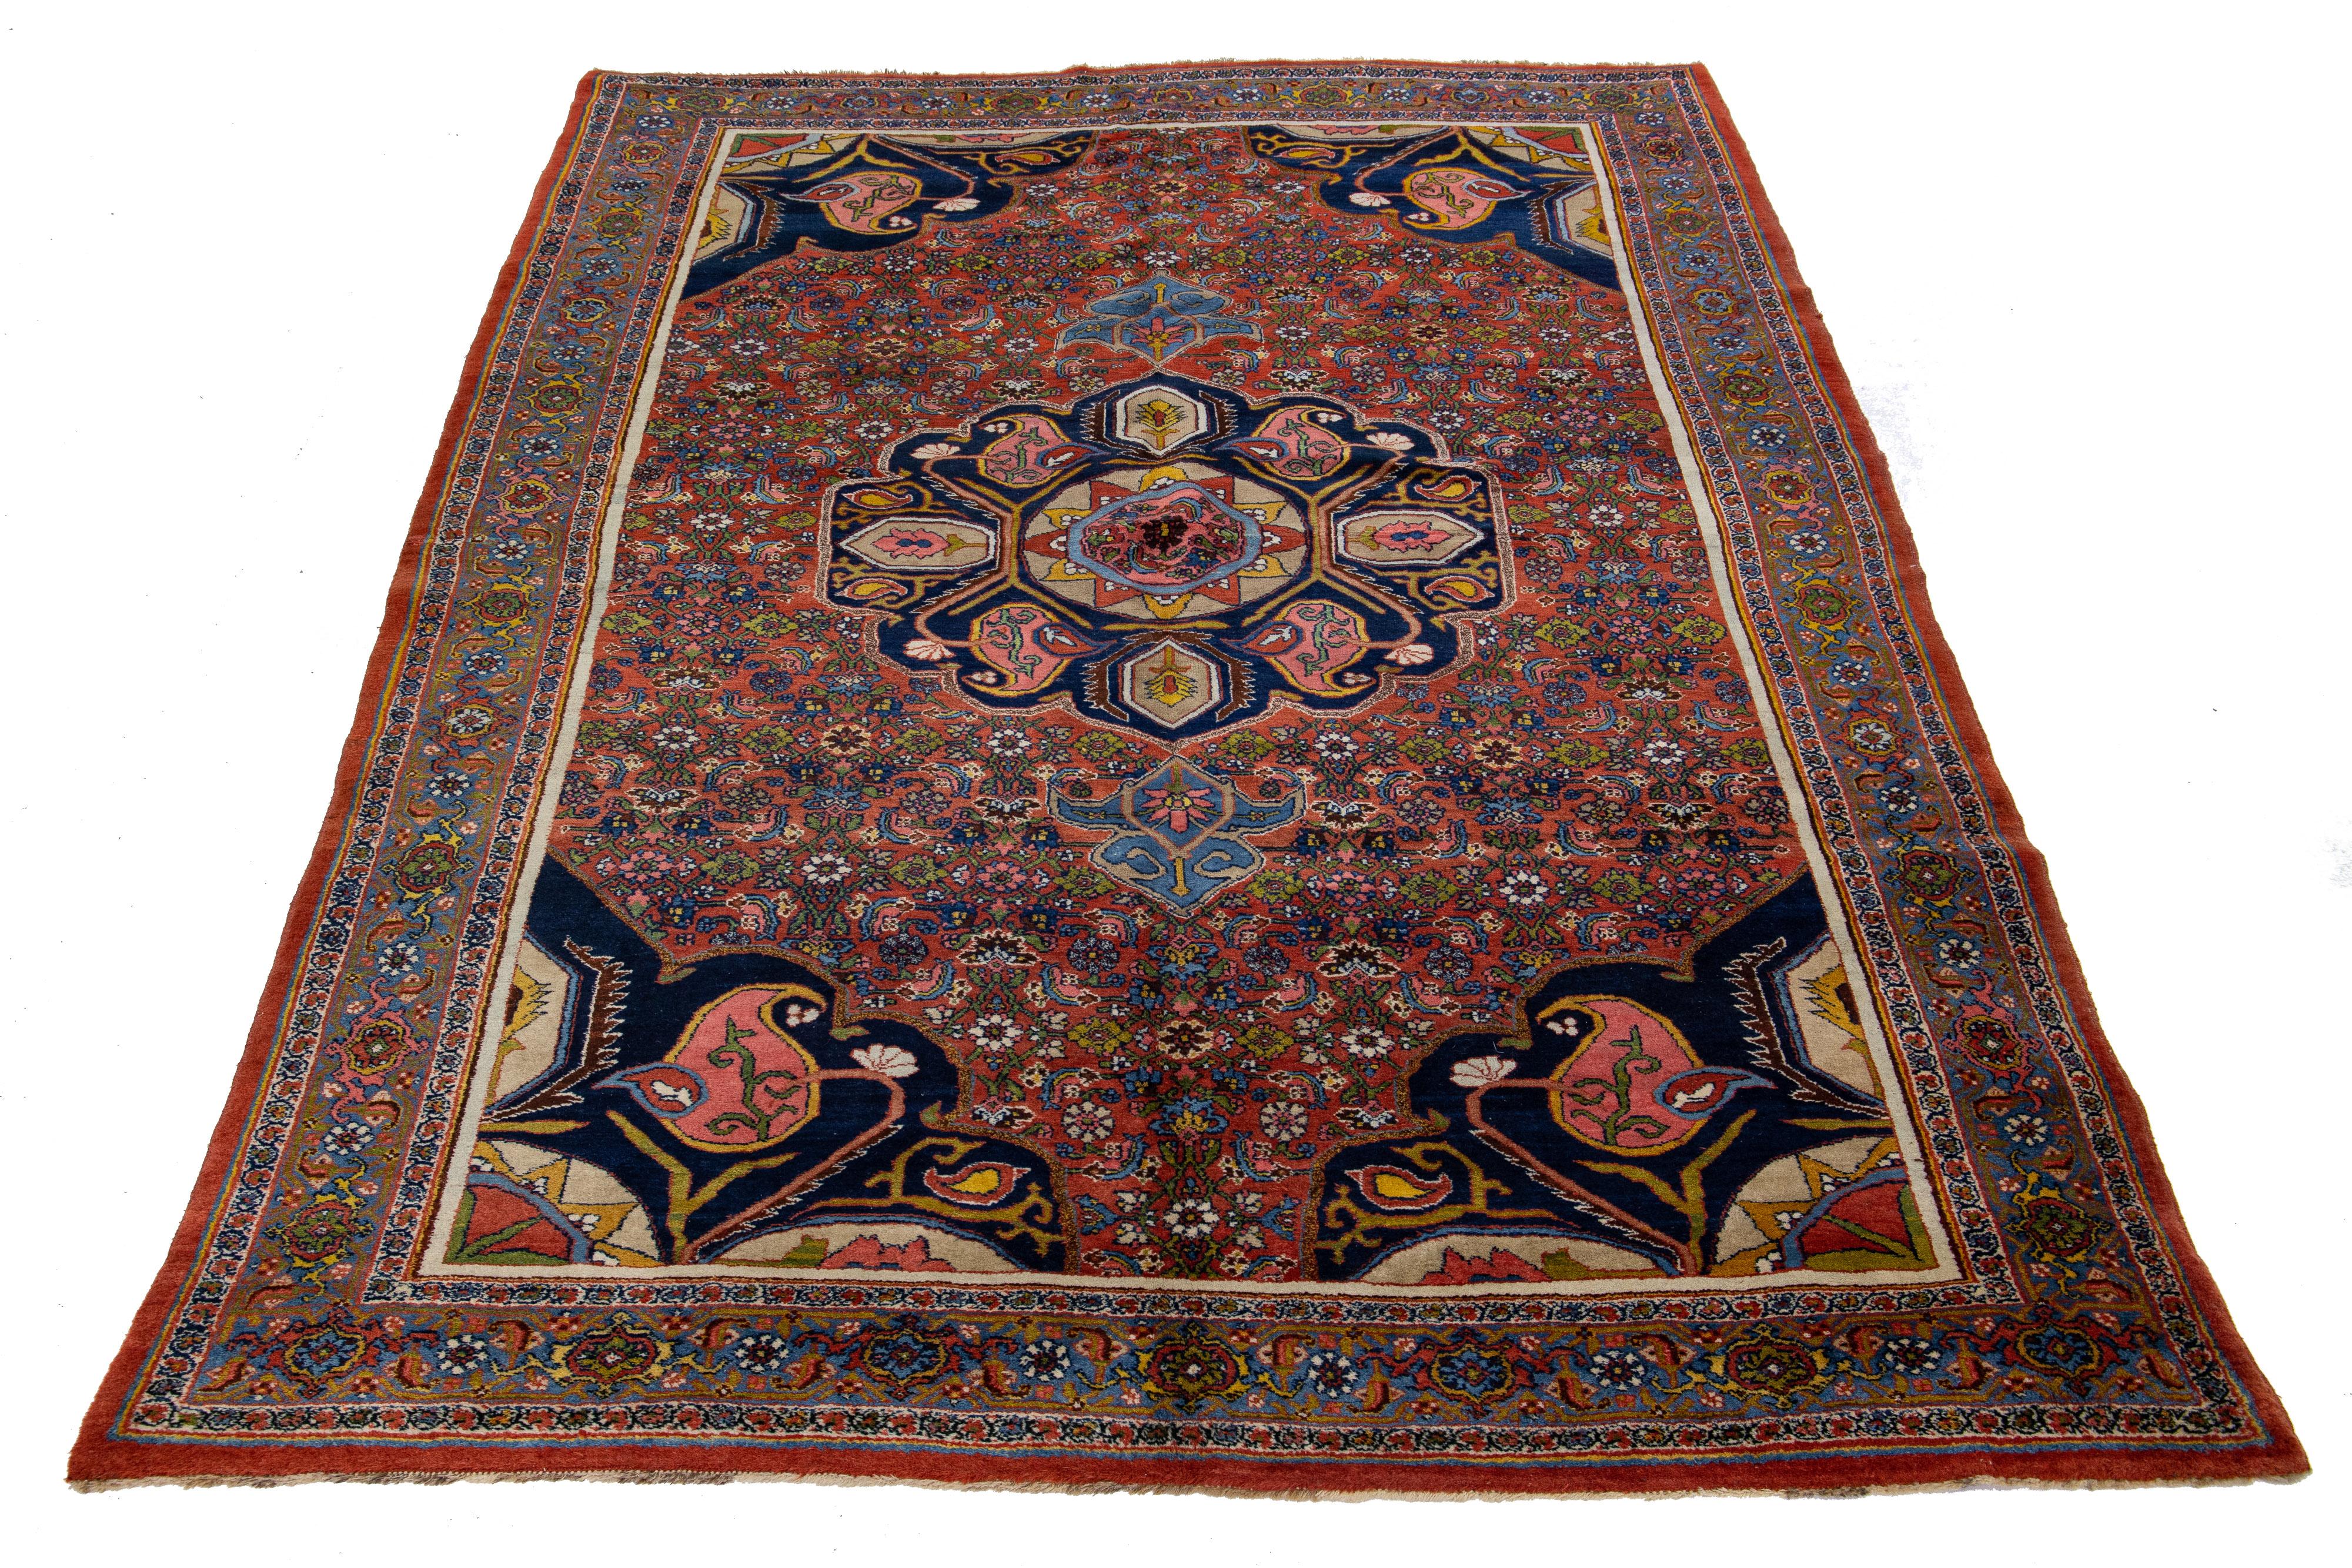 Beautiful antique Bidjar hand-knotted wool rug with a red color field. This Persian rug has a blue frame with multicolor accents in a gorgeous all-over traditional floral design.

This rug measures 7'5